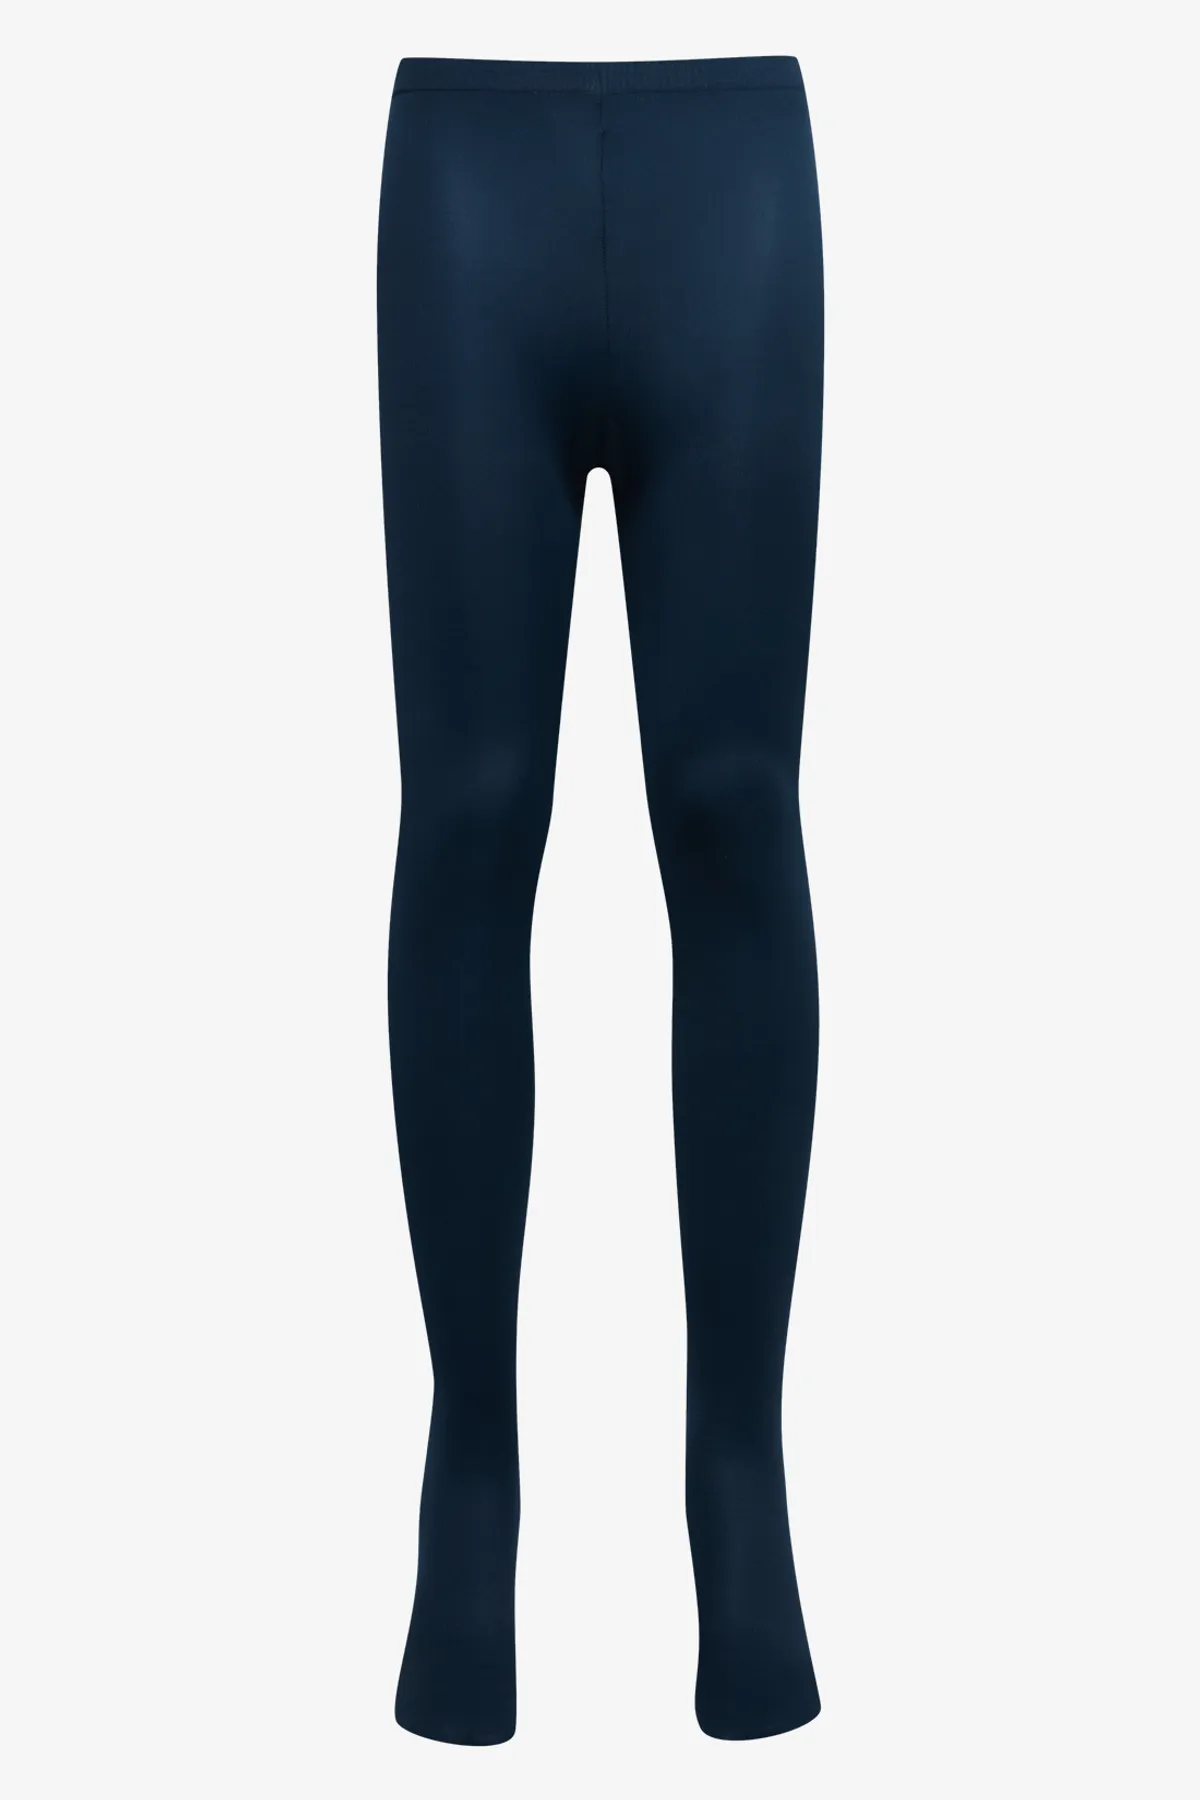 Opaque tights navy - Kids's School clothes